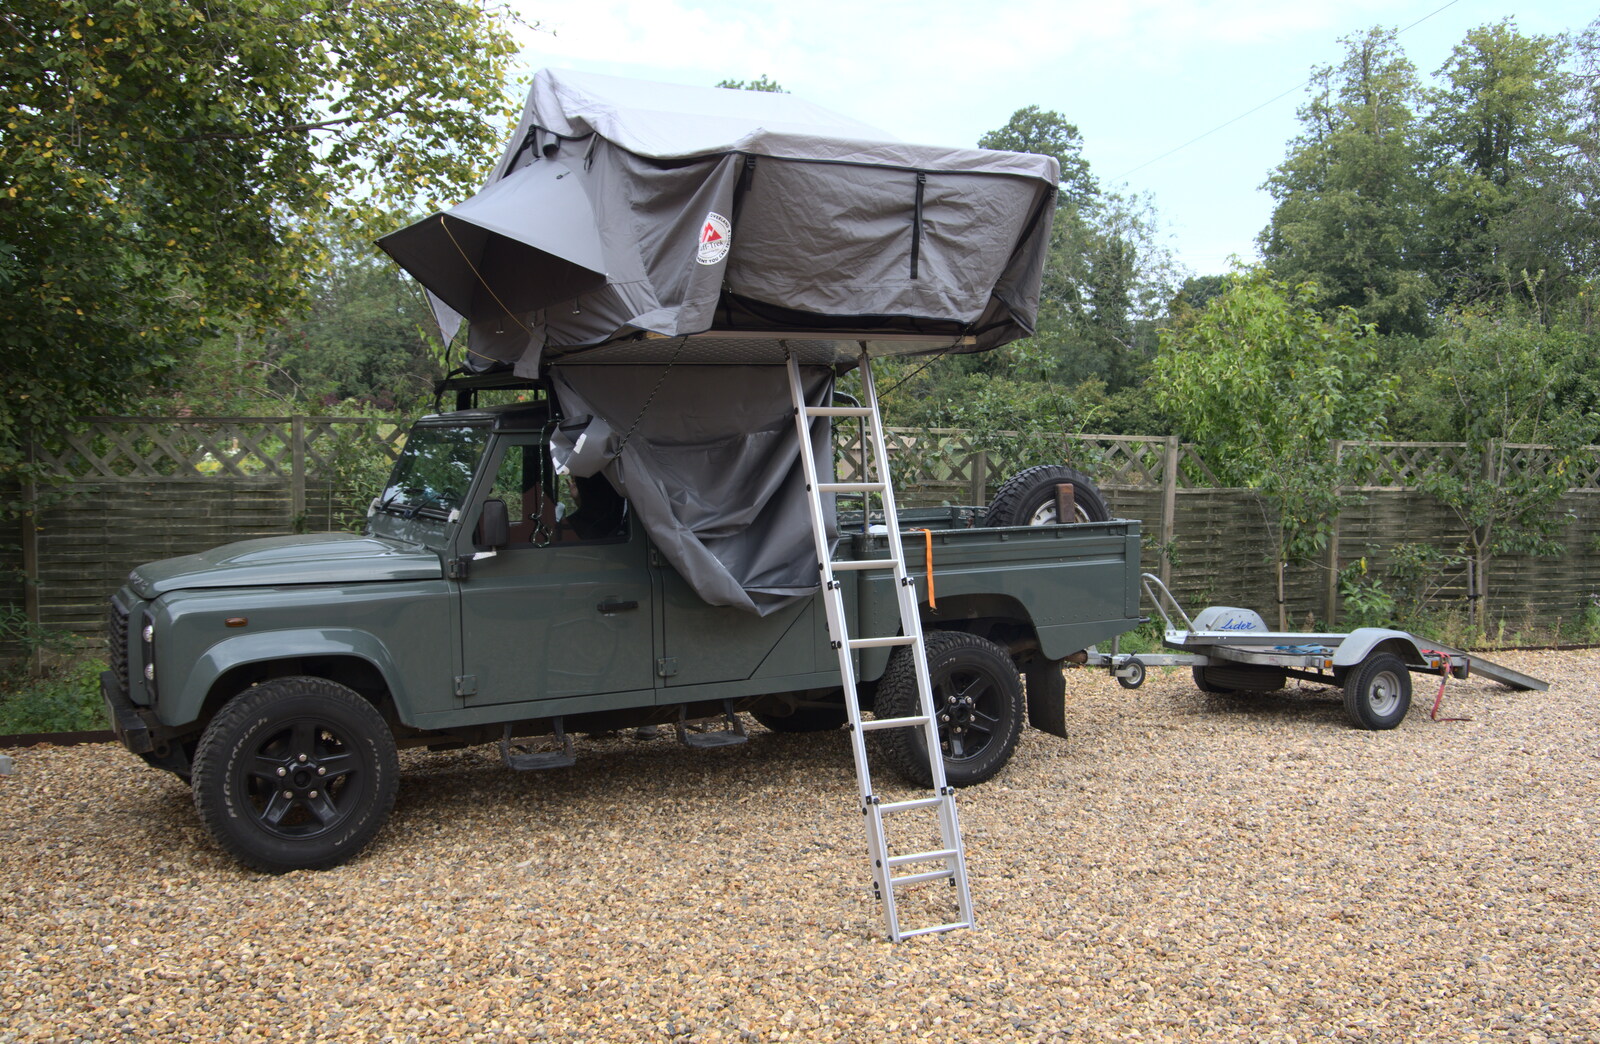 A tent on an extra-long-wheelbase Land Rover from Jules Visits, and a Trip to Tyrrel's Wood, Pulham Market, Norfolk - 16th August 2020